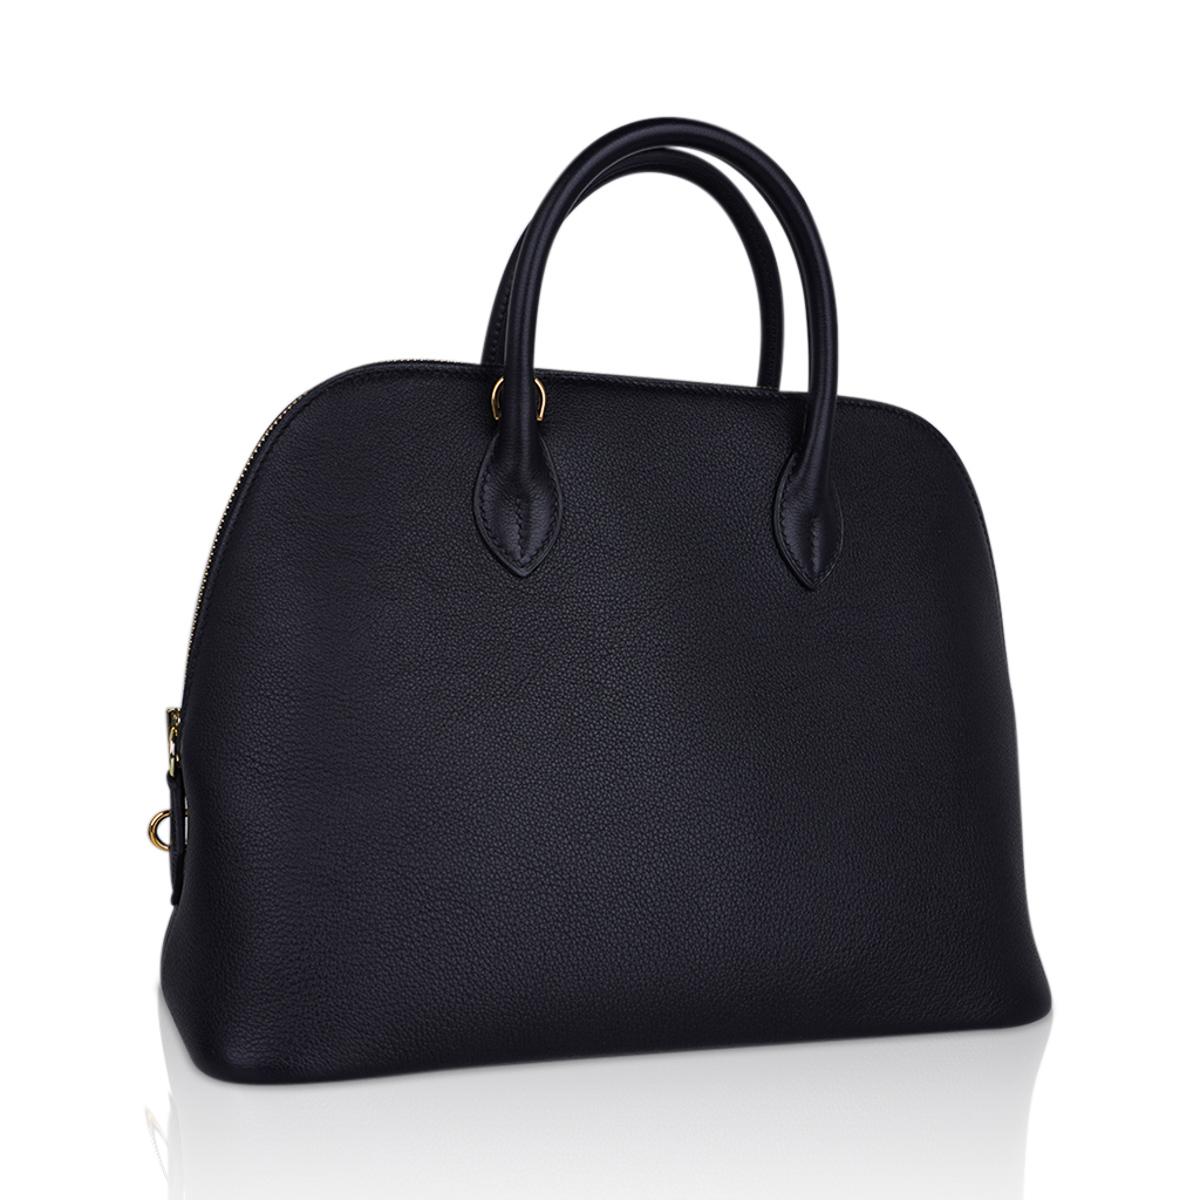 Mightychic offers an Hermes Bolide 30 1923 sleek, clean and modern and easy to fall in love with bag.
Black with Gold hardware sets this beauty apart.
Taurillon Novillo leather has stepped to the forefront for good reason.
Bull leather, with a grain